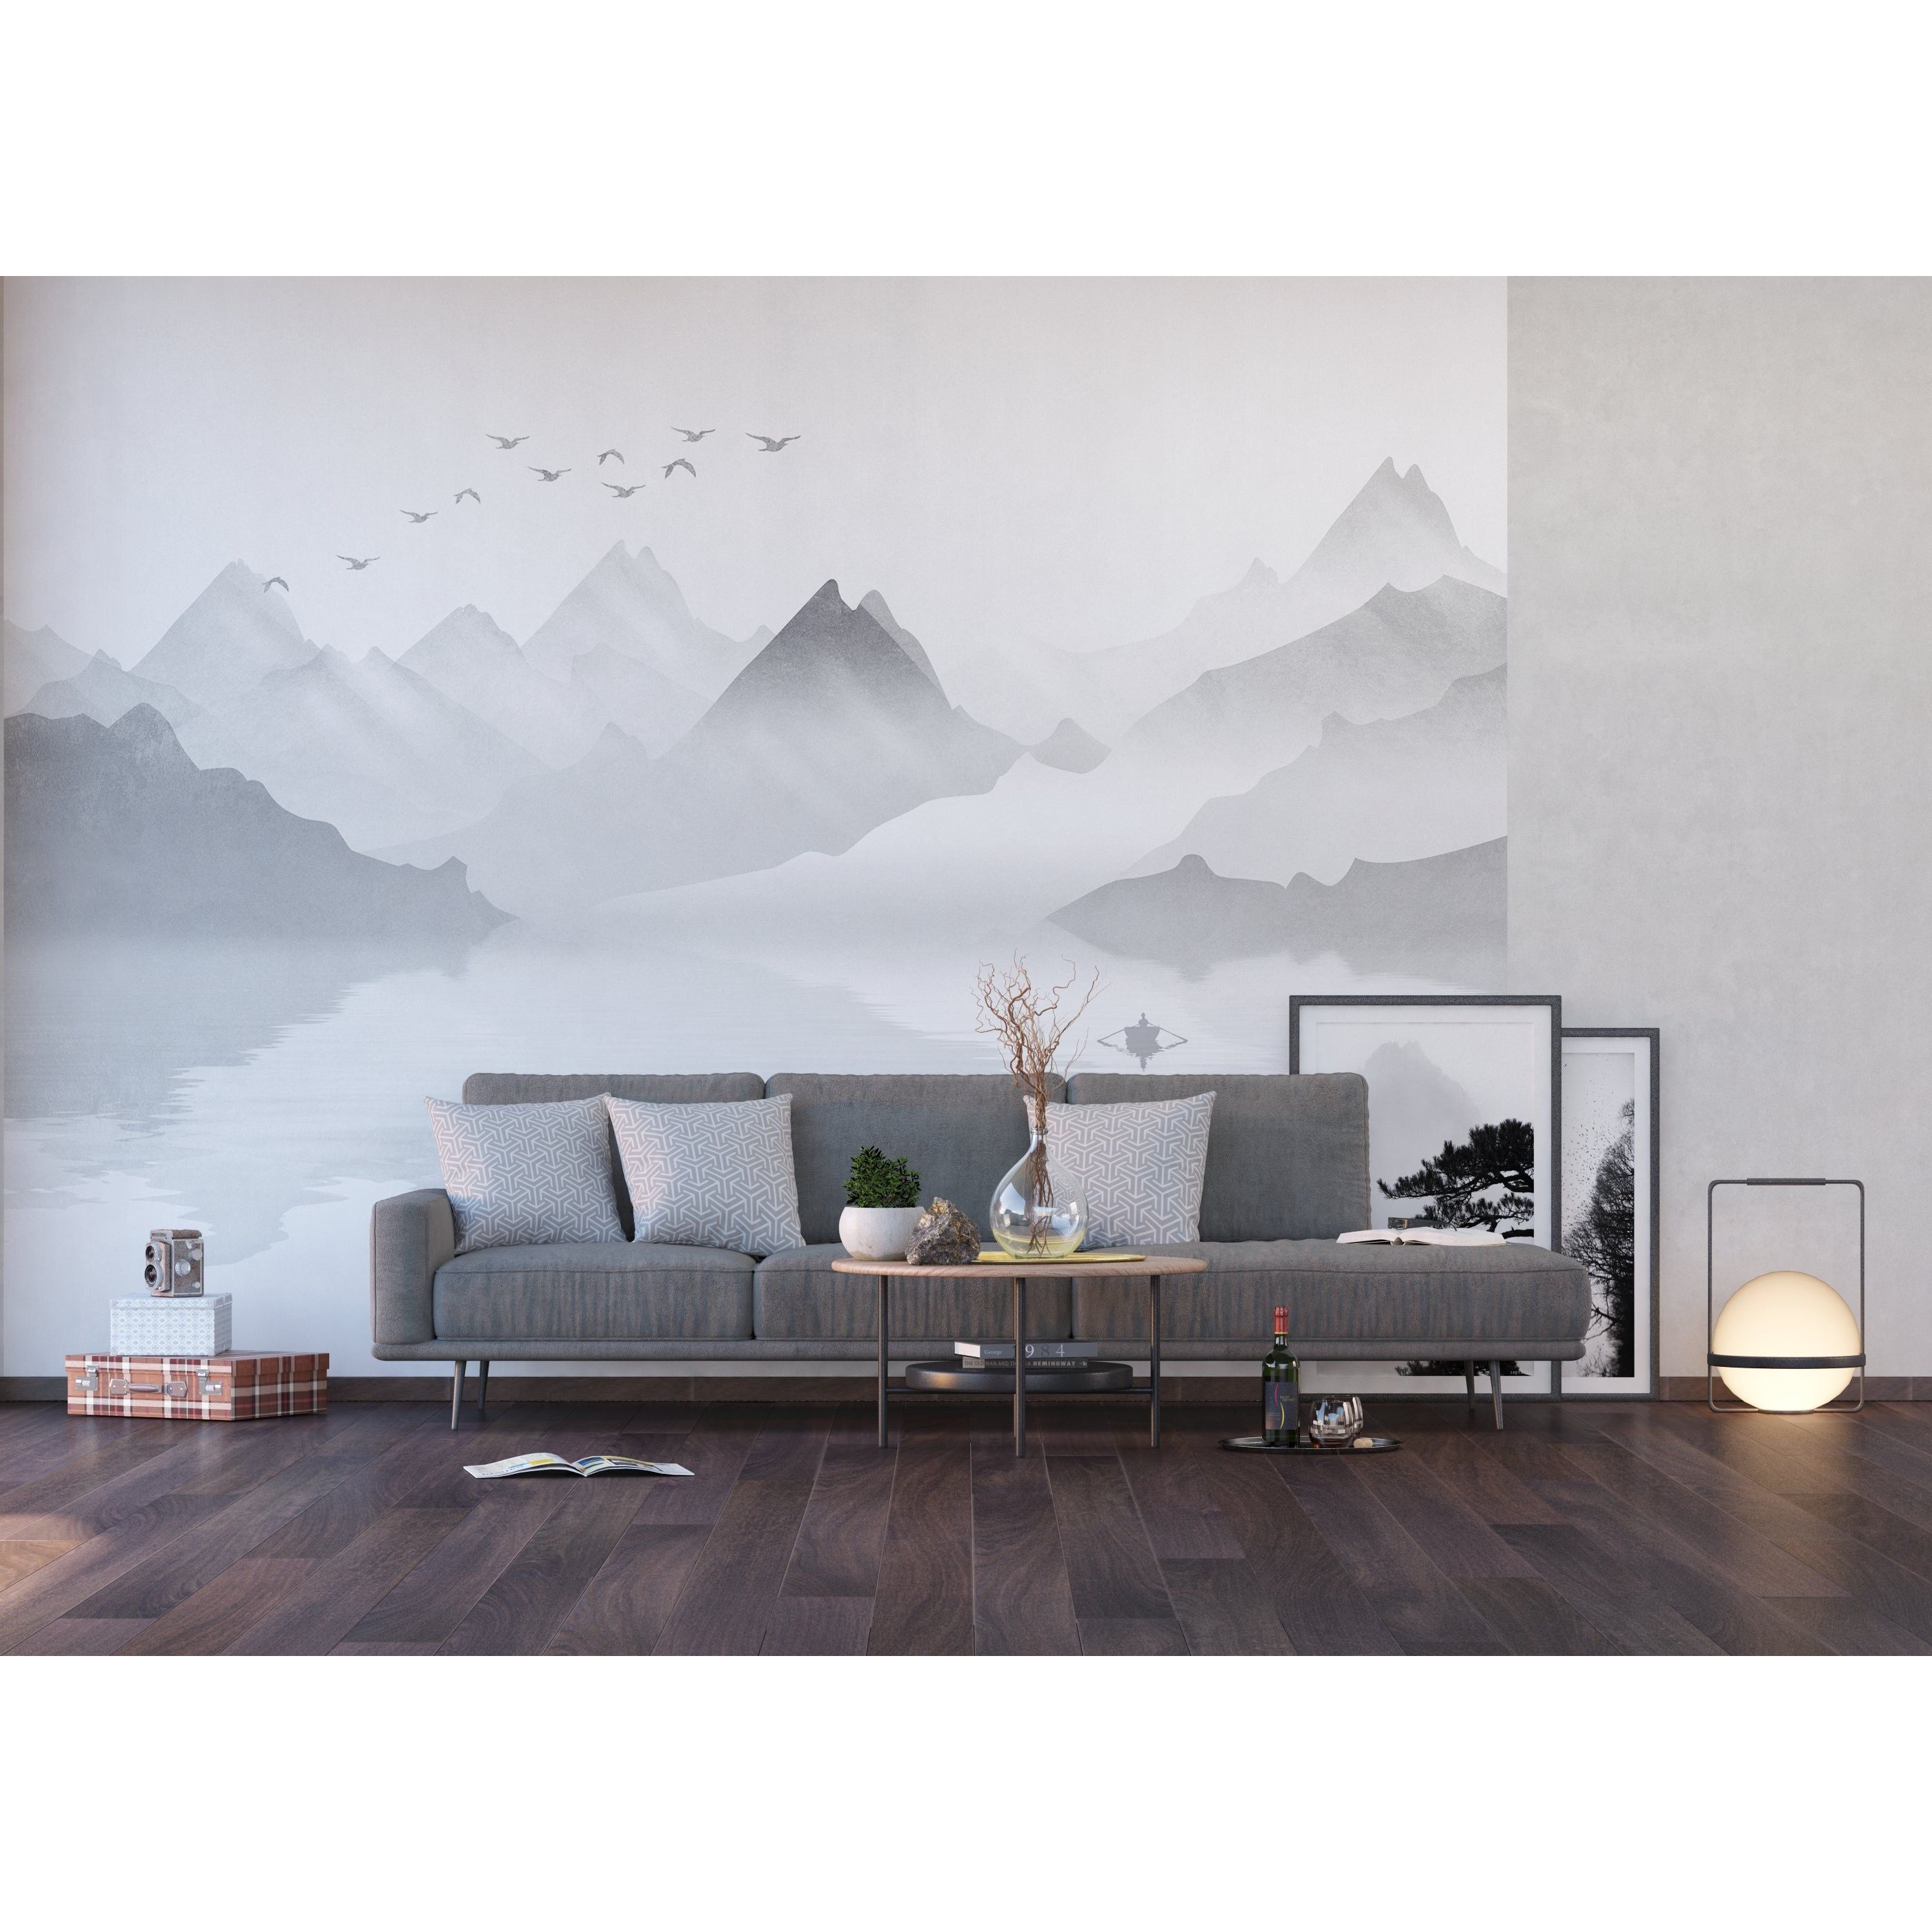 Serene Black and White Mountain Wall Mural with Birds